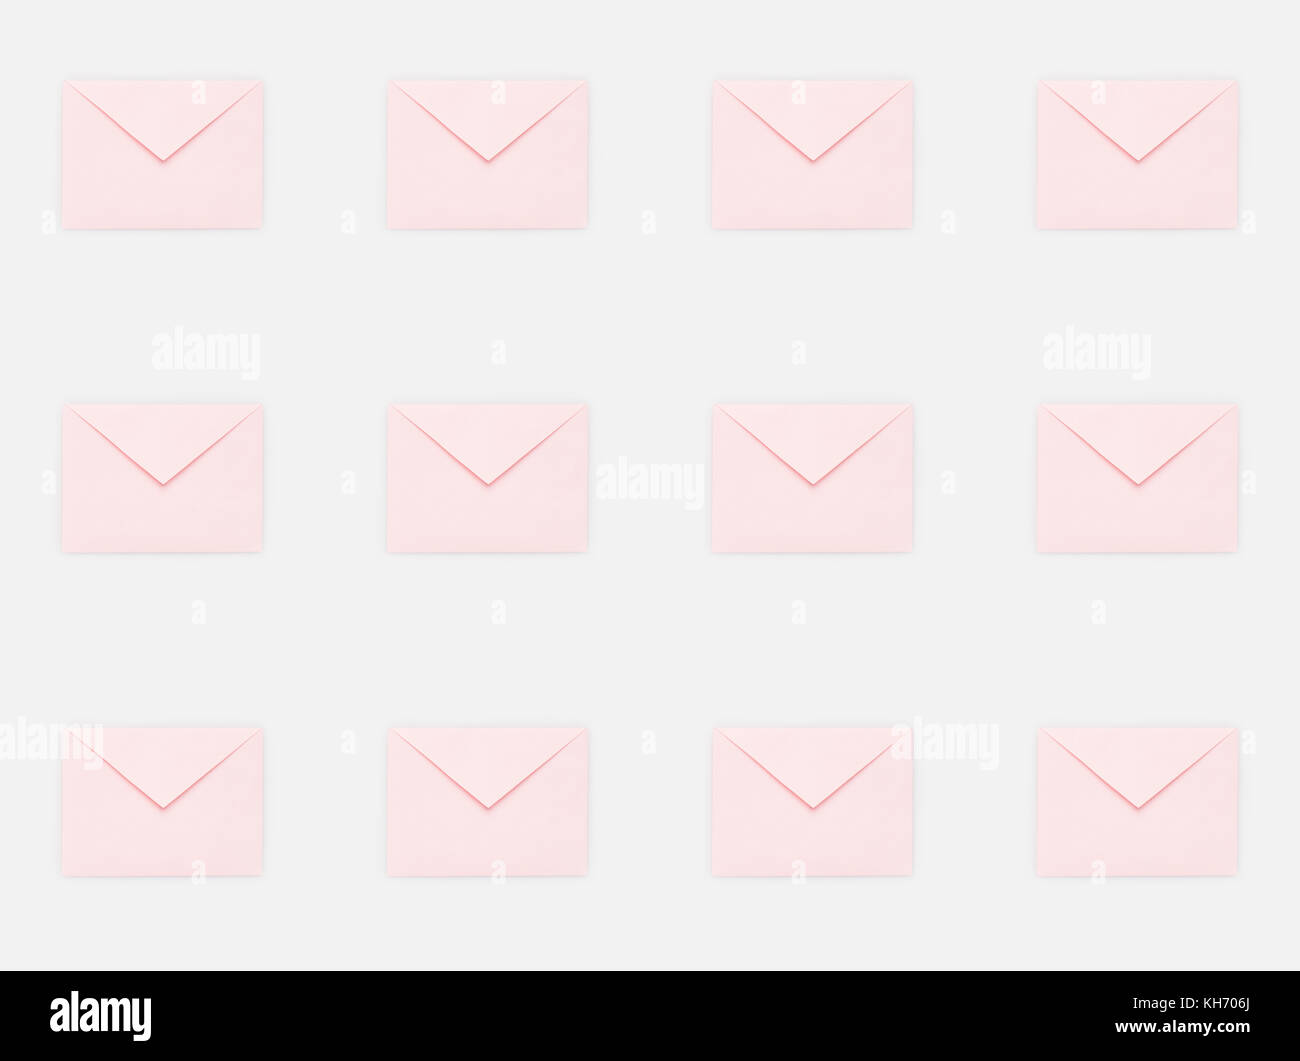 repetitive pattern of envelopes Stock Photo